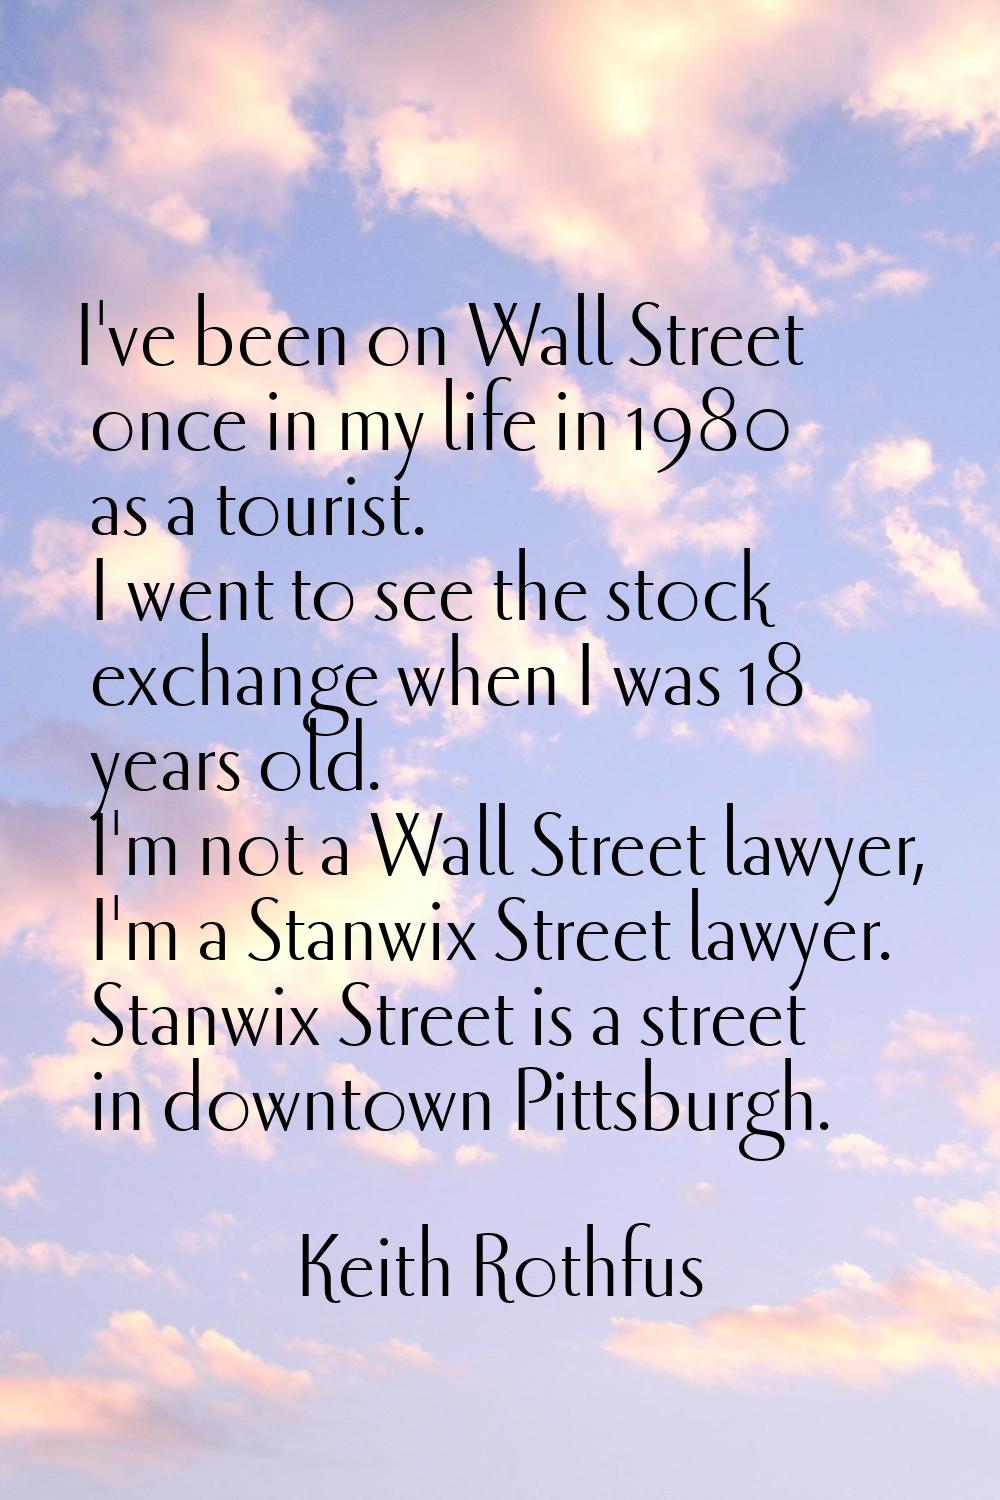 I've been on Wall Street once in my life in 1980 as a tourist. I went to see the stock exchange whe